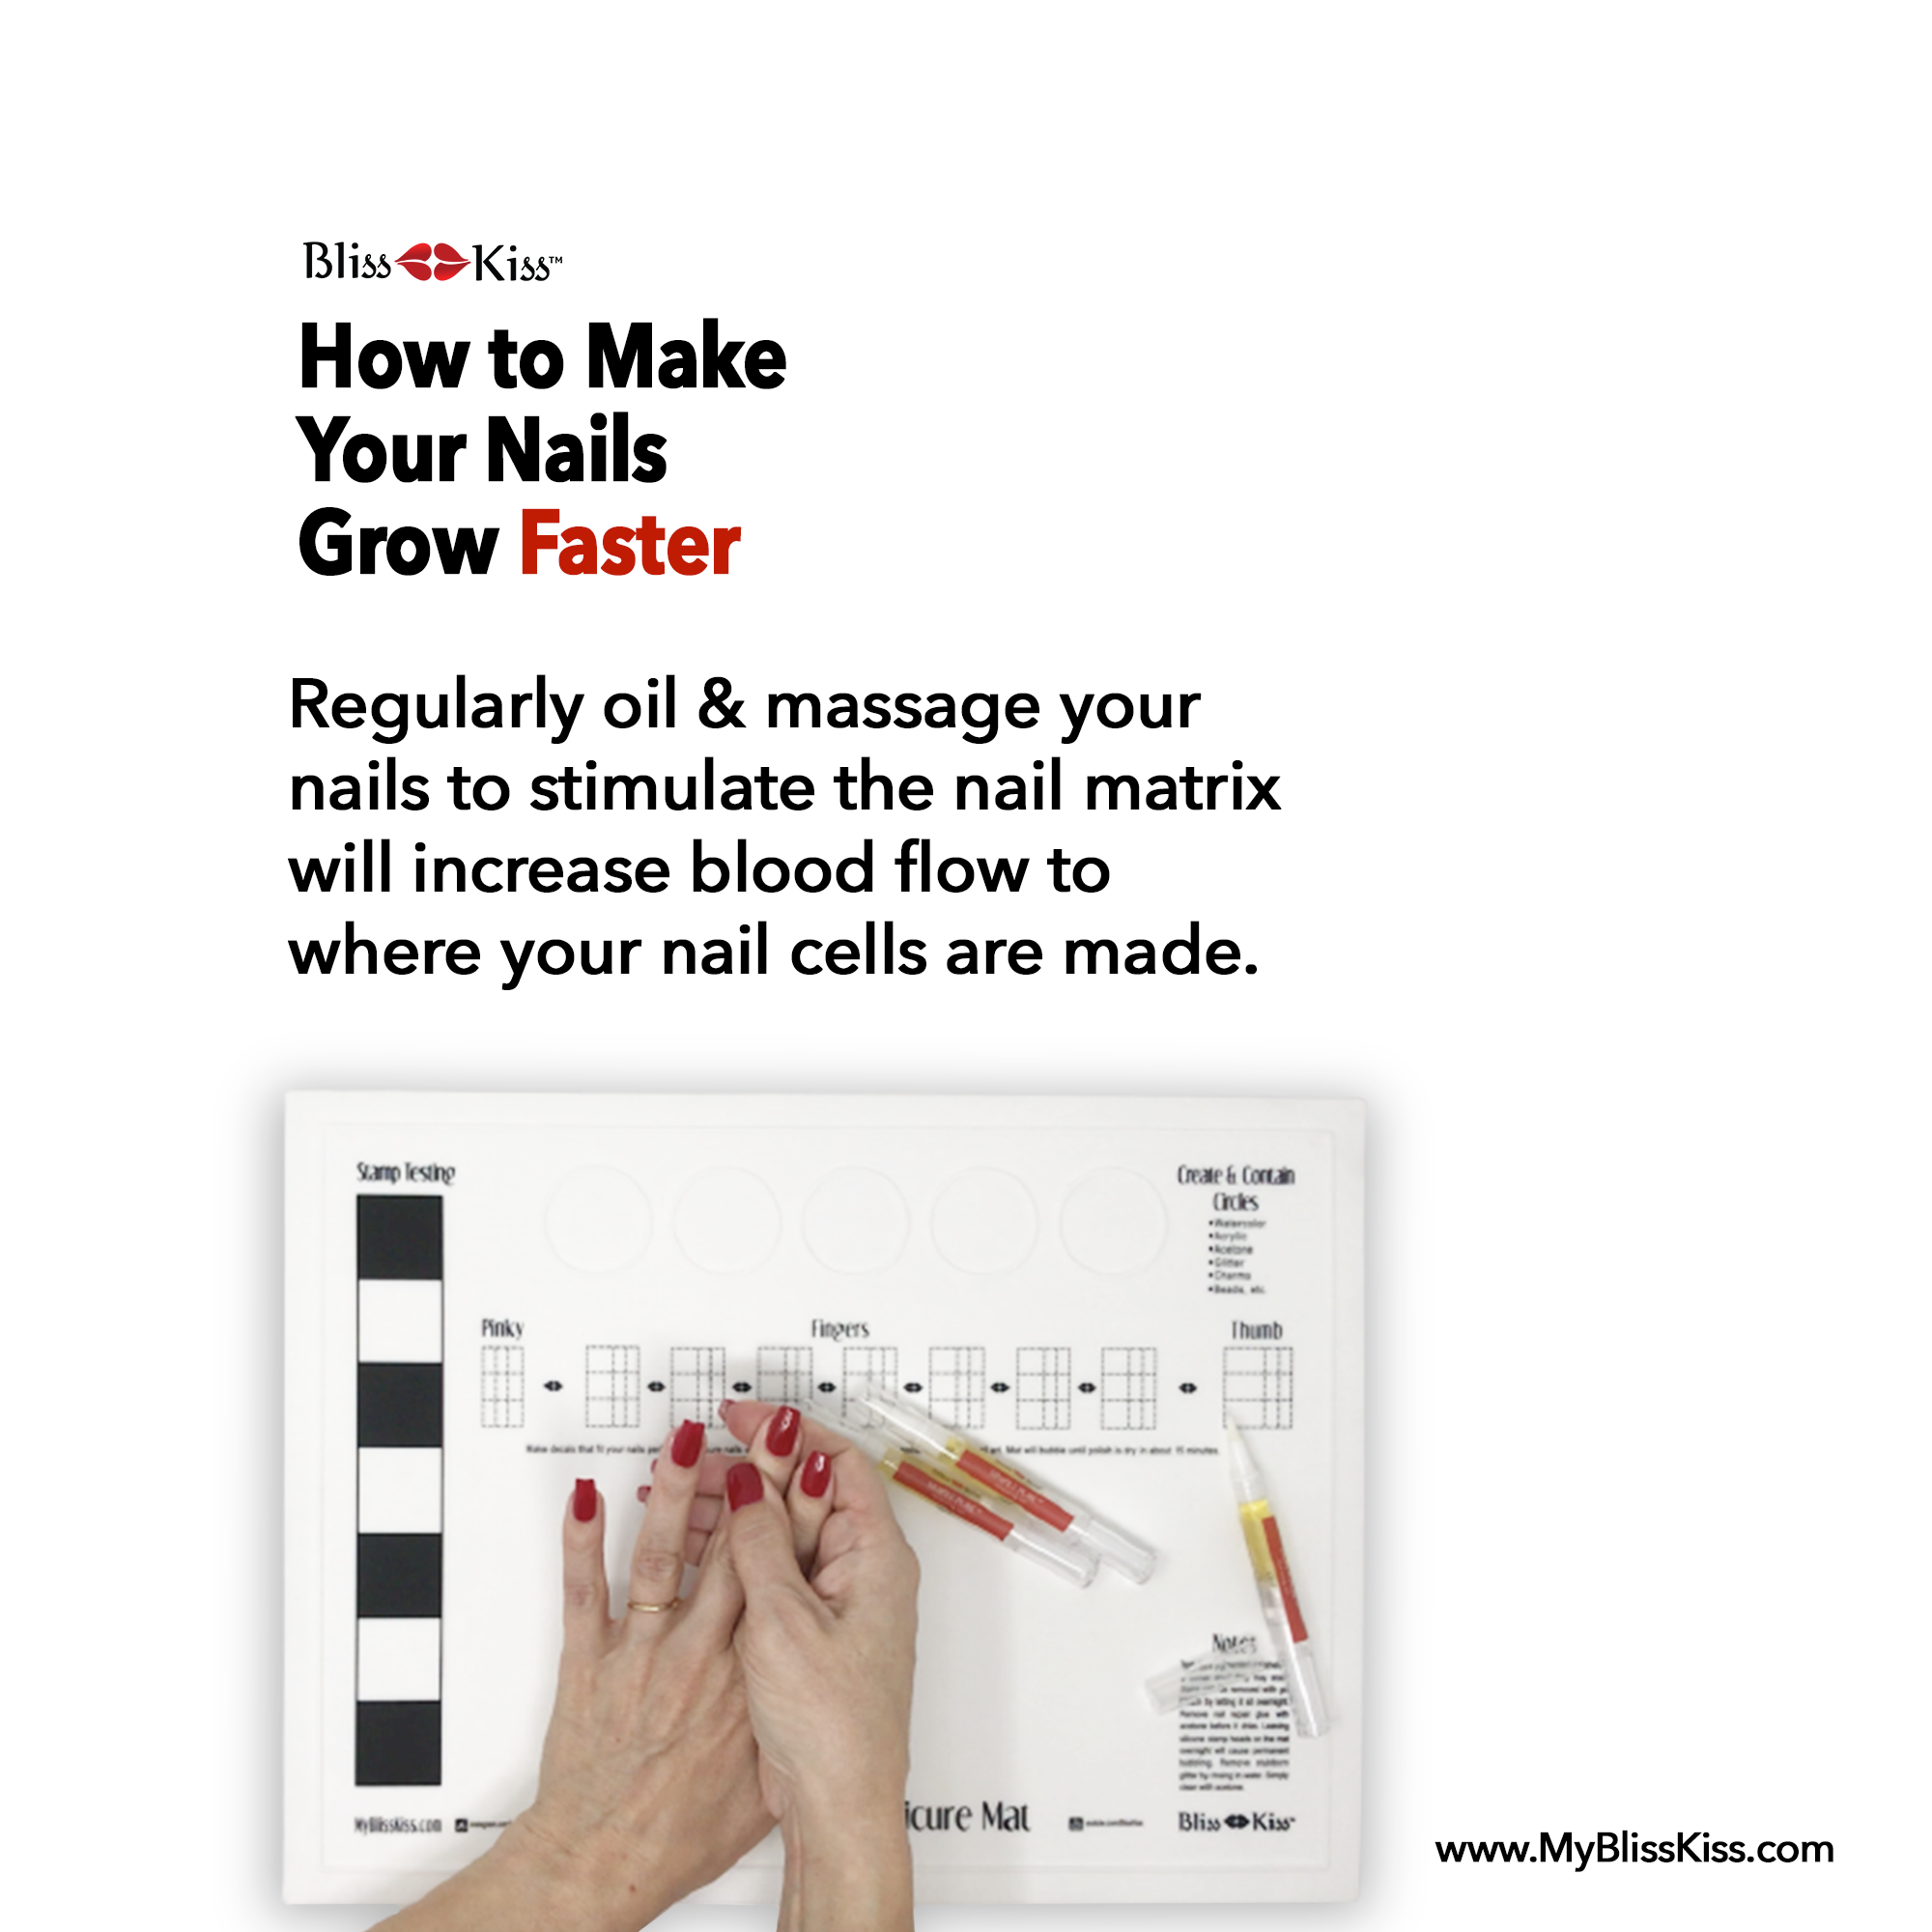 How to Make Your Nails Grow FASTER! - Bliss Kiss by Finely